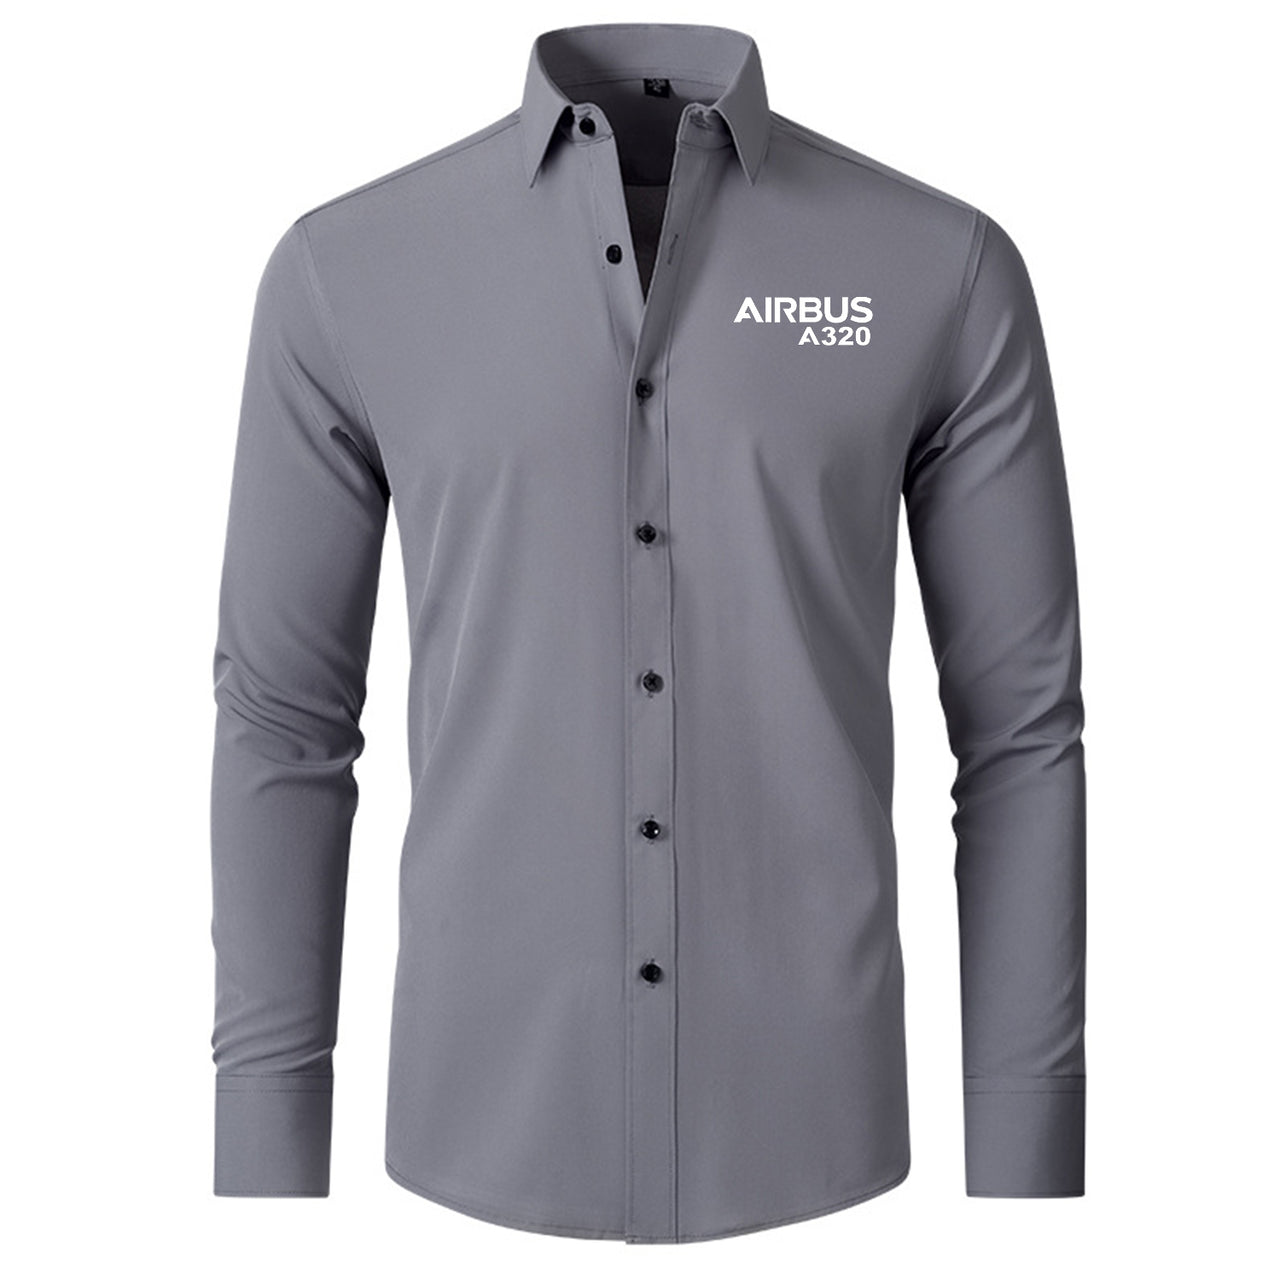 Airbus A320 & Text Designed Long Sleeve Shirts